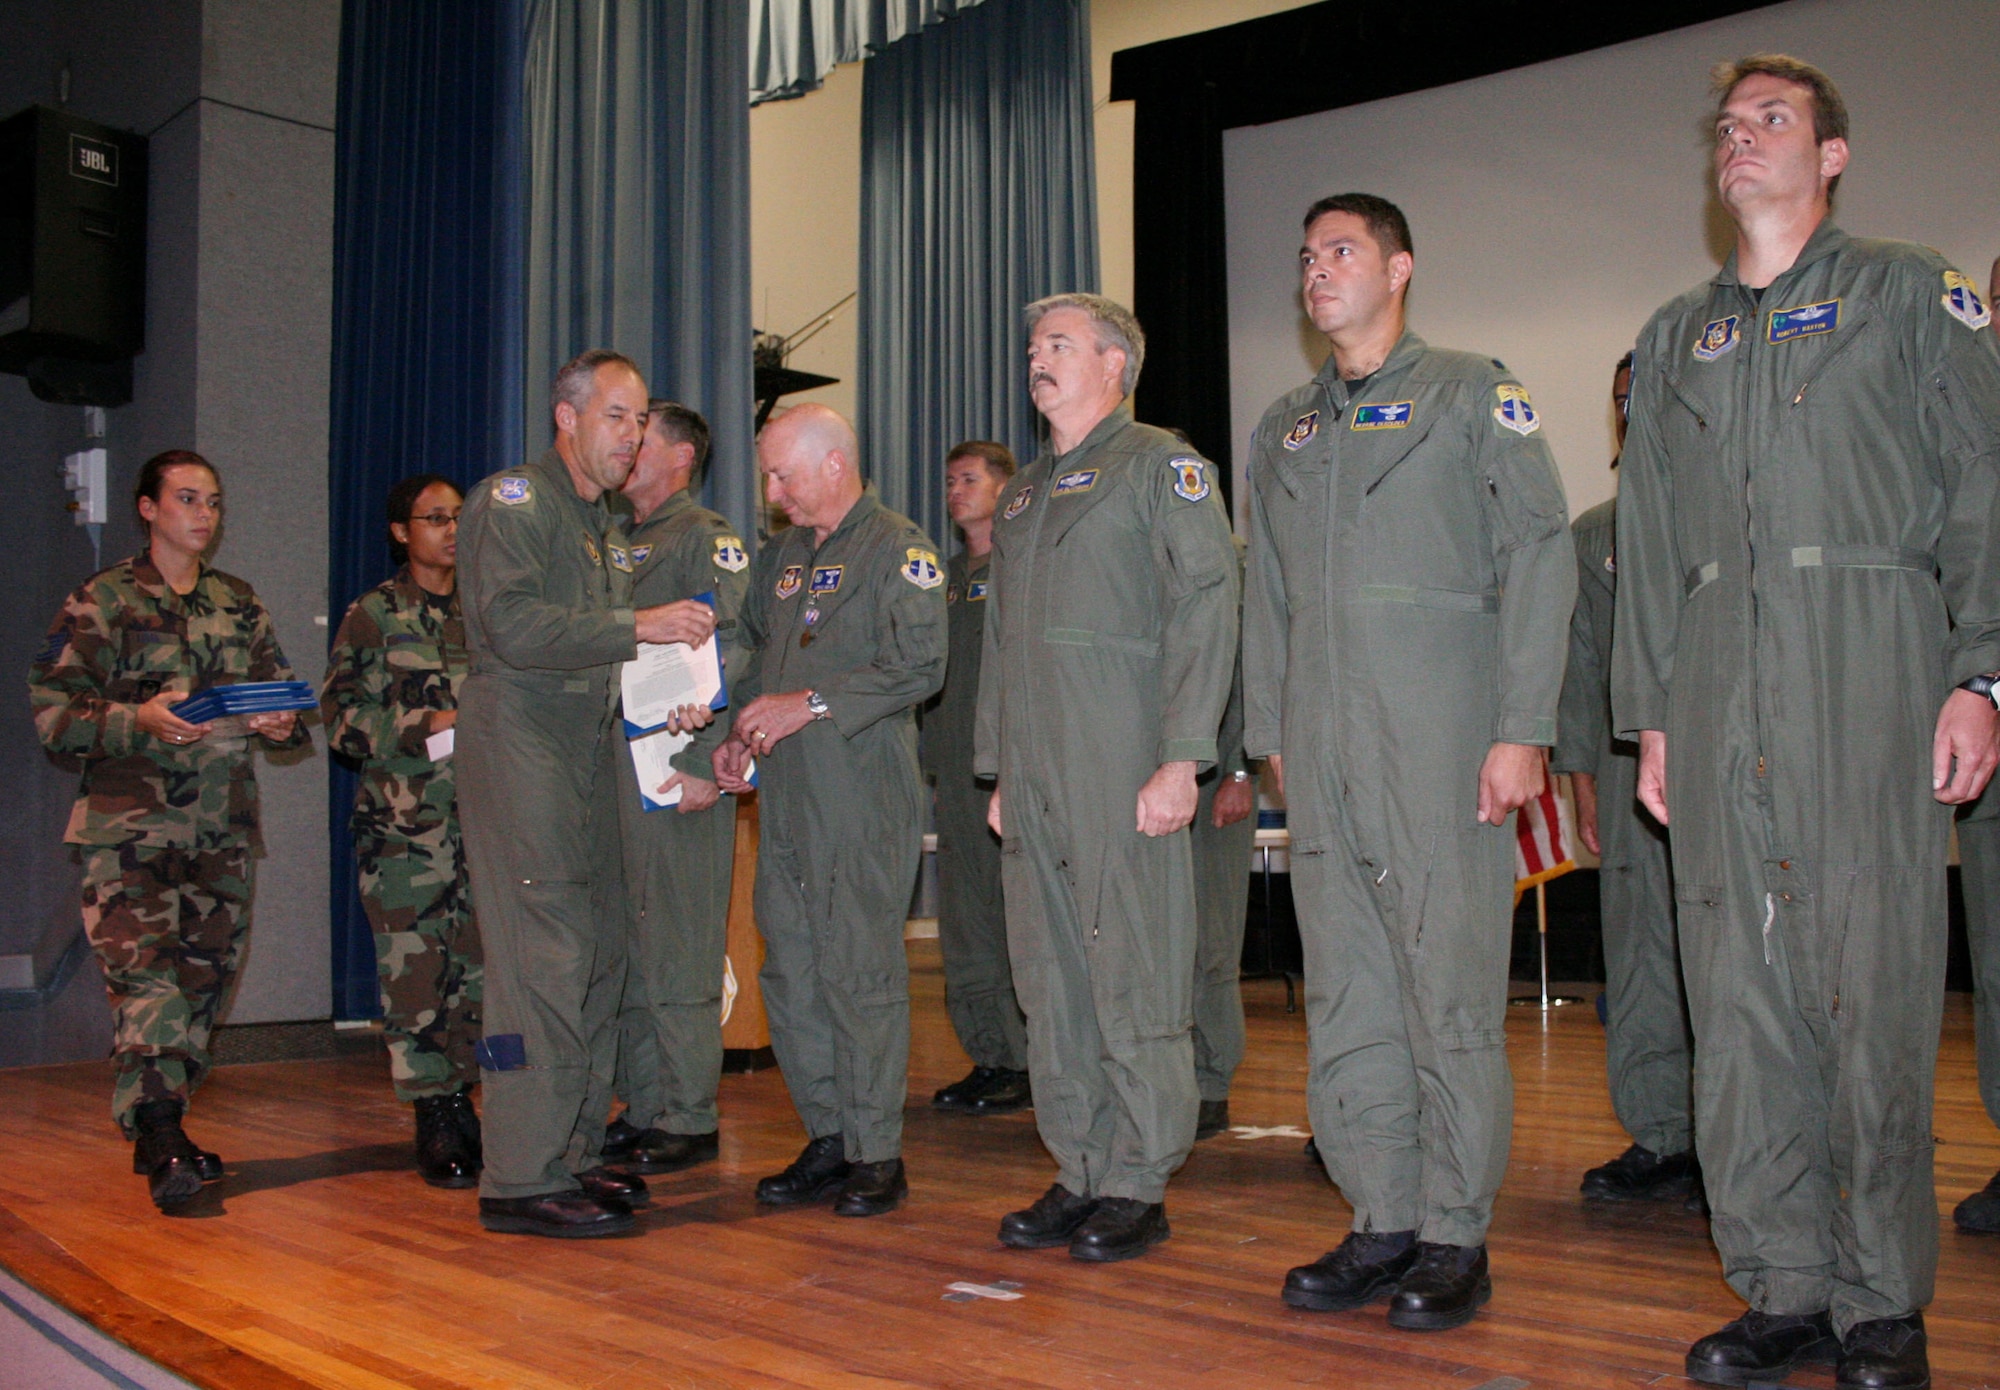 PATRICK AIR FORCE BASE, Fla. -- Thirty-two Air Force Reservists from the 920th Rescue Wing were awarded the Air Medal for their outstanding performance during Hurricane Katrina rescue operations at a ceremony held in the base theater here today. The Air Medal is awarded to servicemembers who have distinguished themselves by meritorious achievement while participating in aerial flight. Awards recognize single acts of merit, heroism or meritorious service. (U.S. Air Force photo/Staff Sgt. Paul Flipse) 